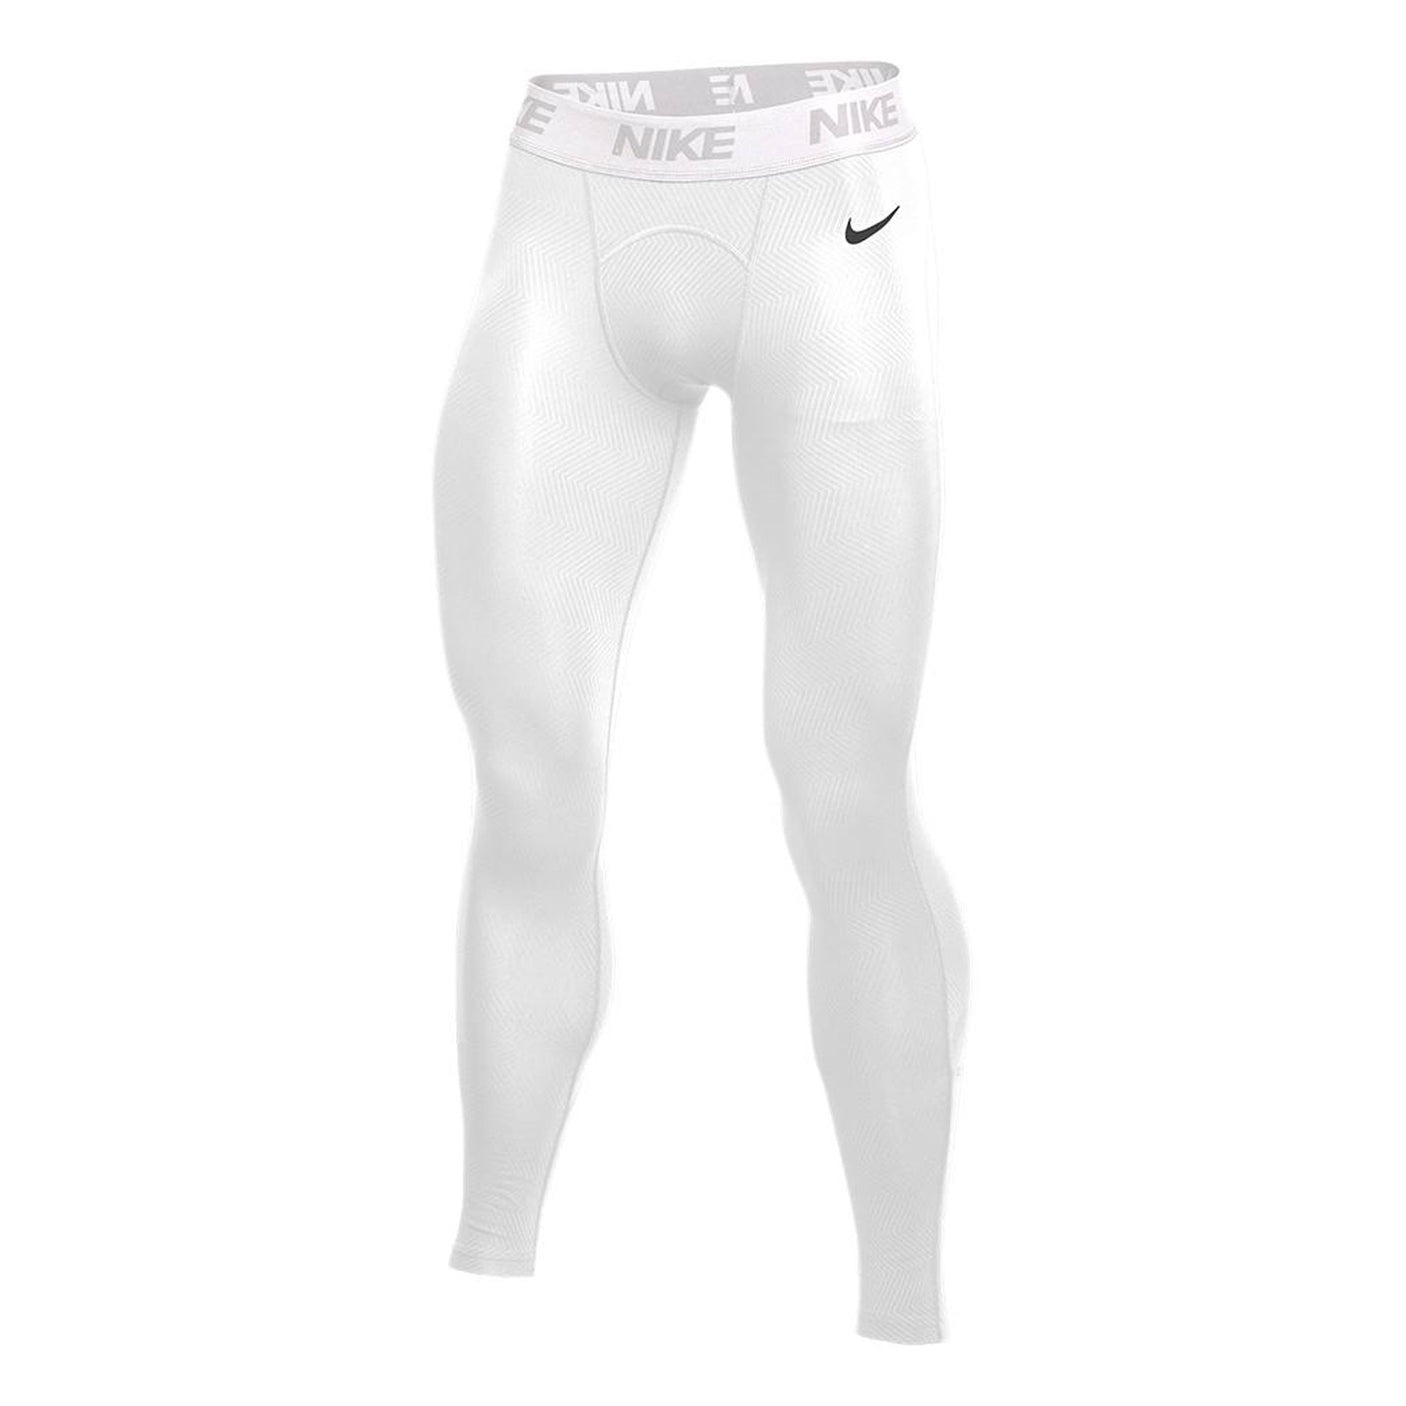 Nike Pro Combat Compression Top Men's White New with Tags MT 697 - Locker  Room Direct